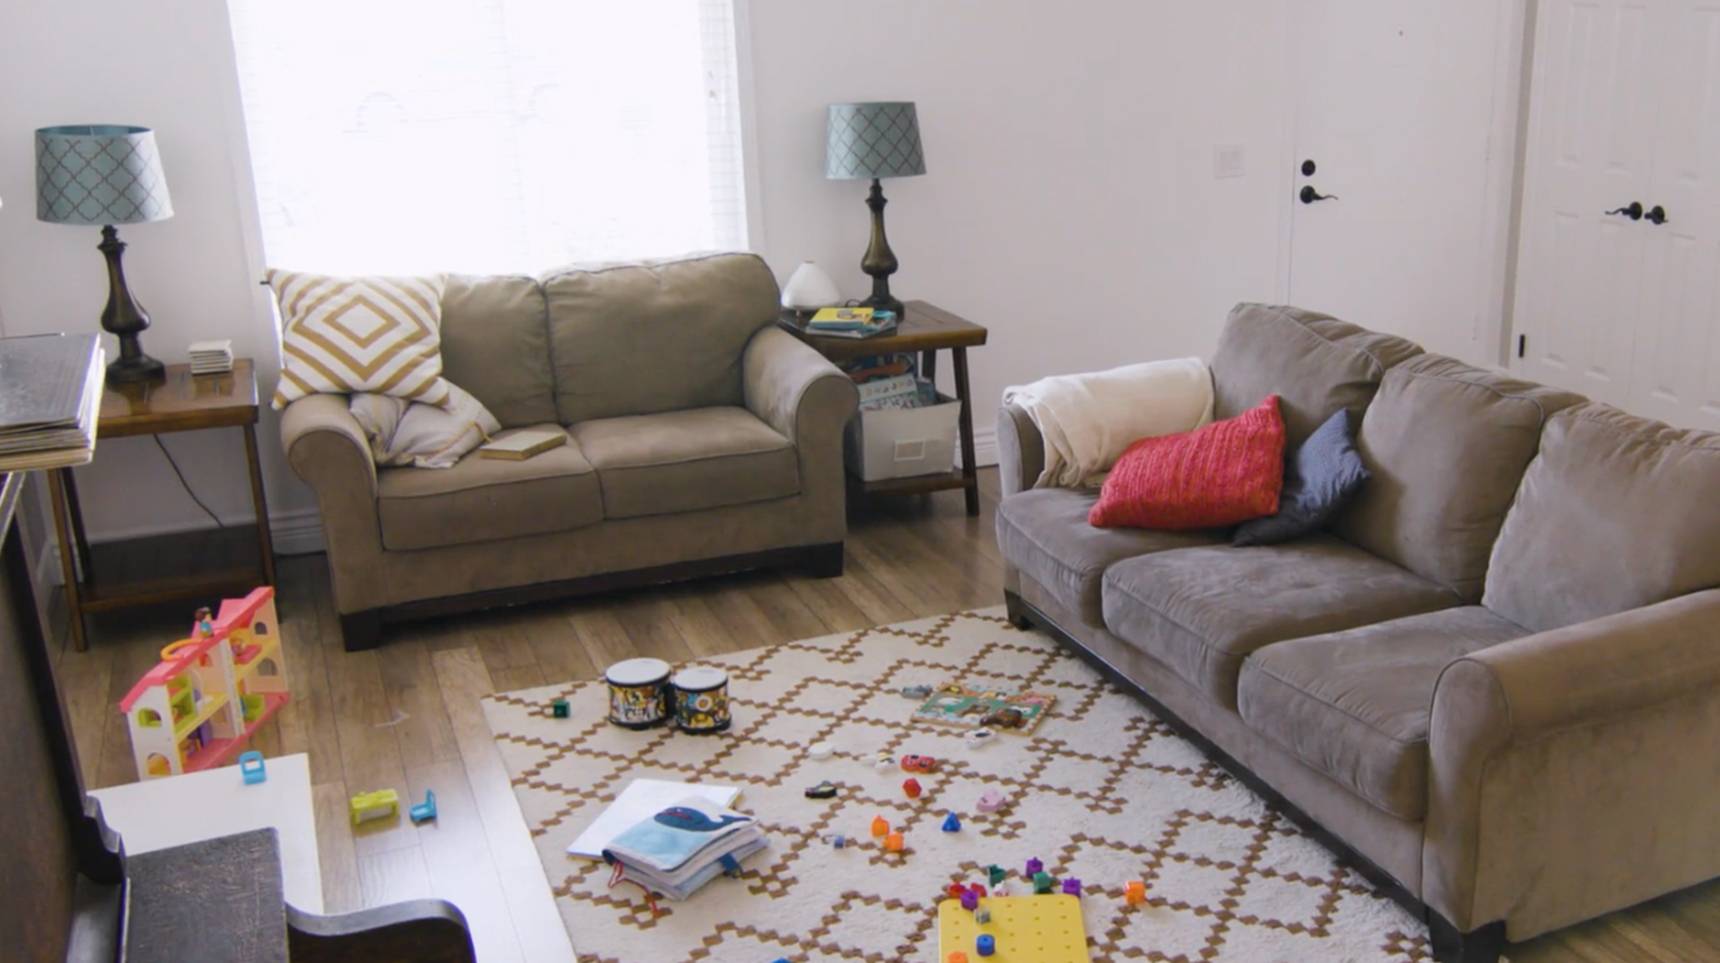 DESIGN CREW MAKEOVERA Living Room For All Ages